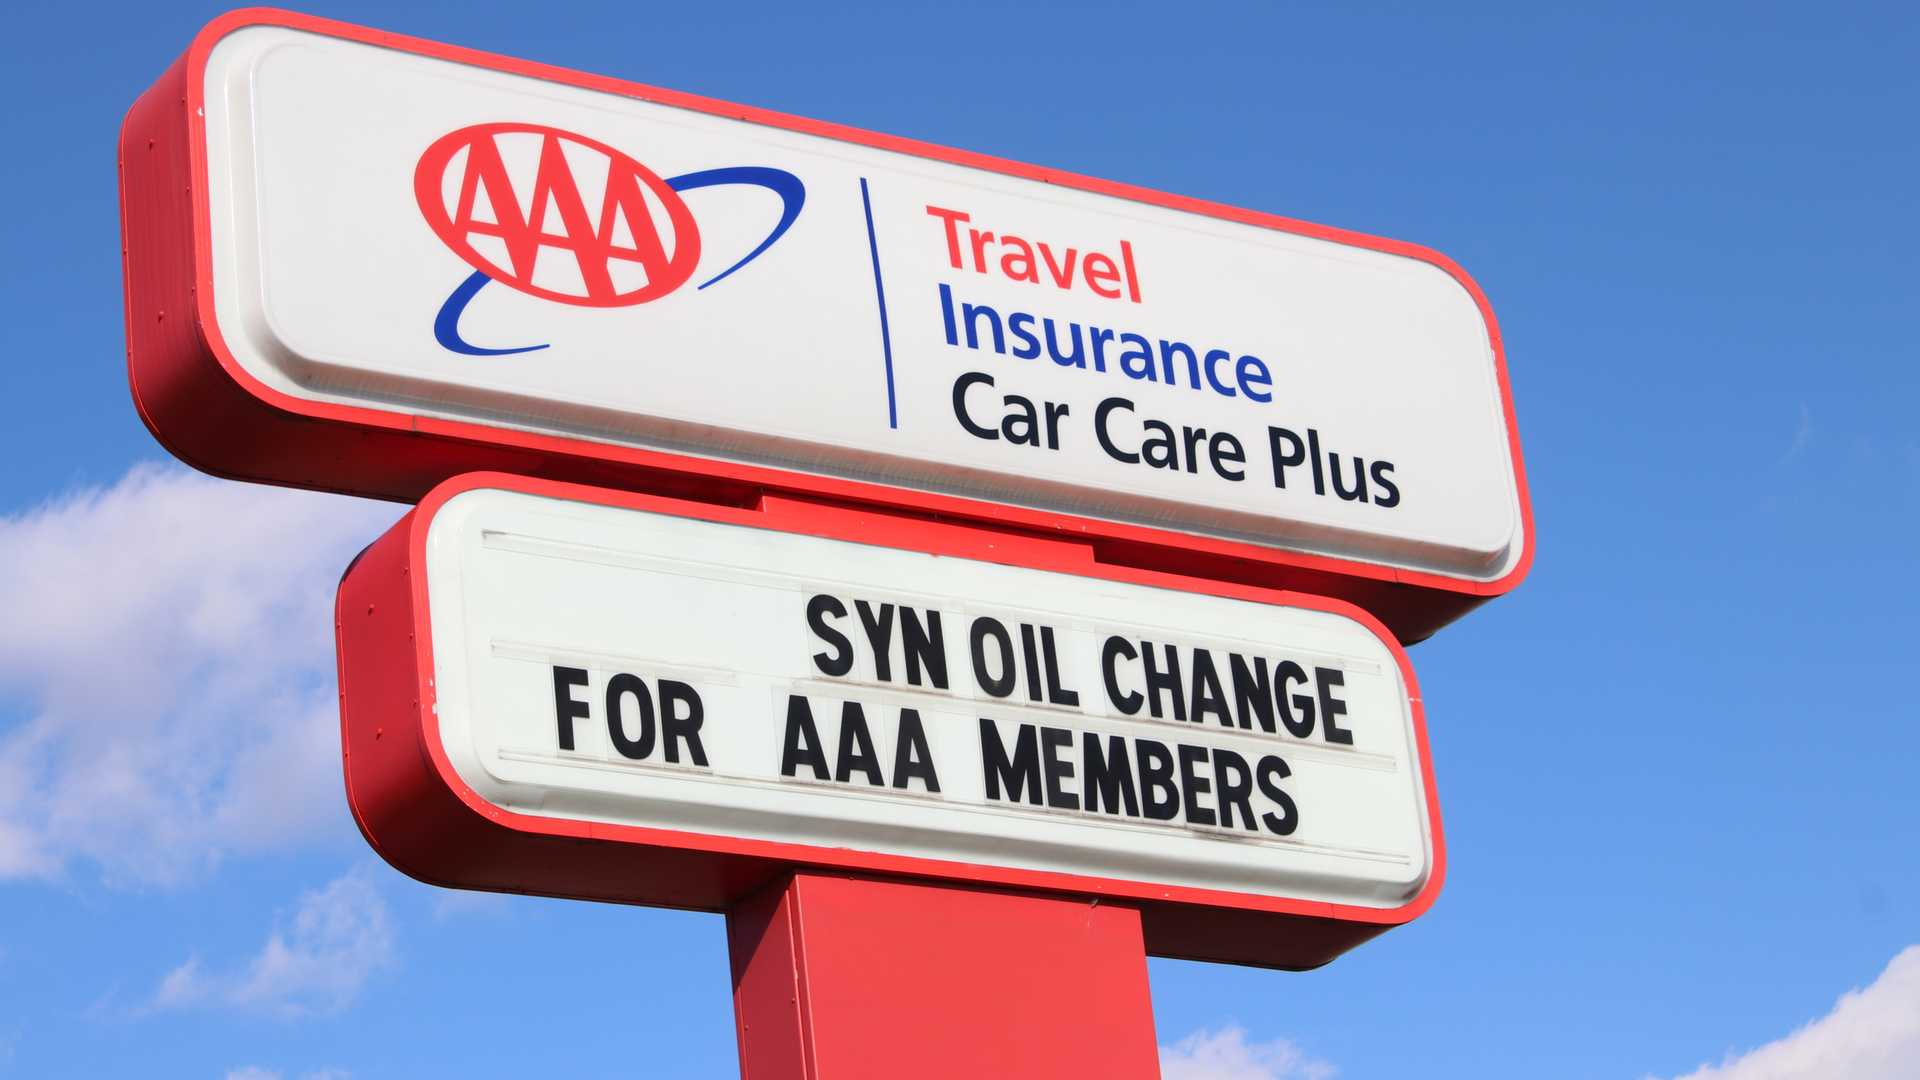 Aaa Car Insurance Review 2020 for proportions 1920 X 1080